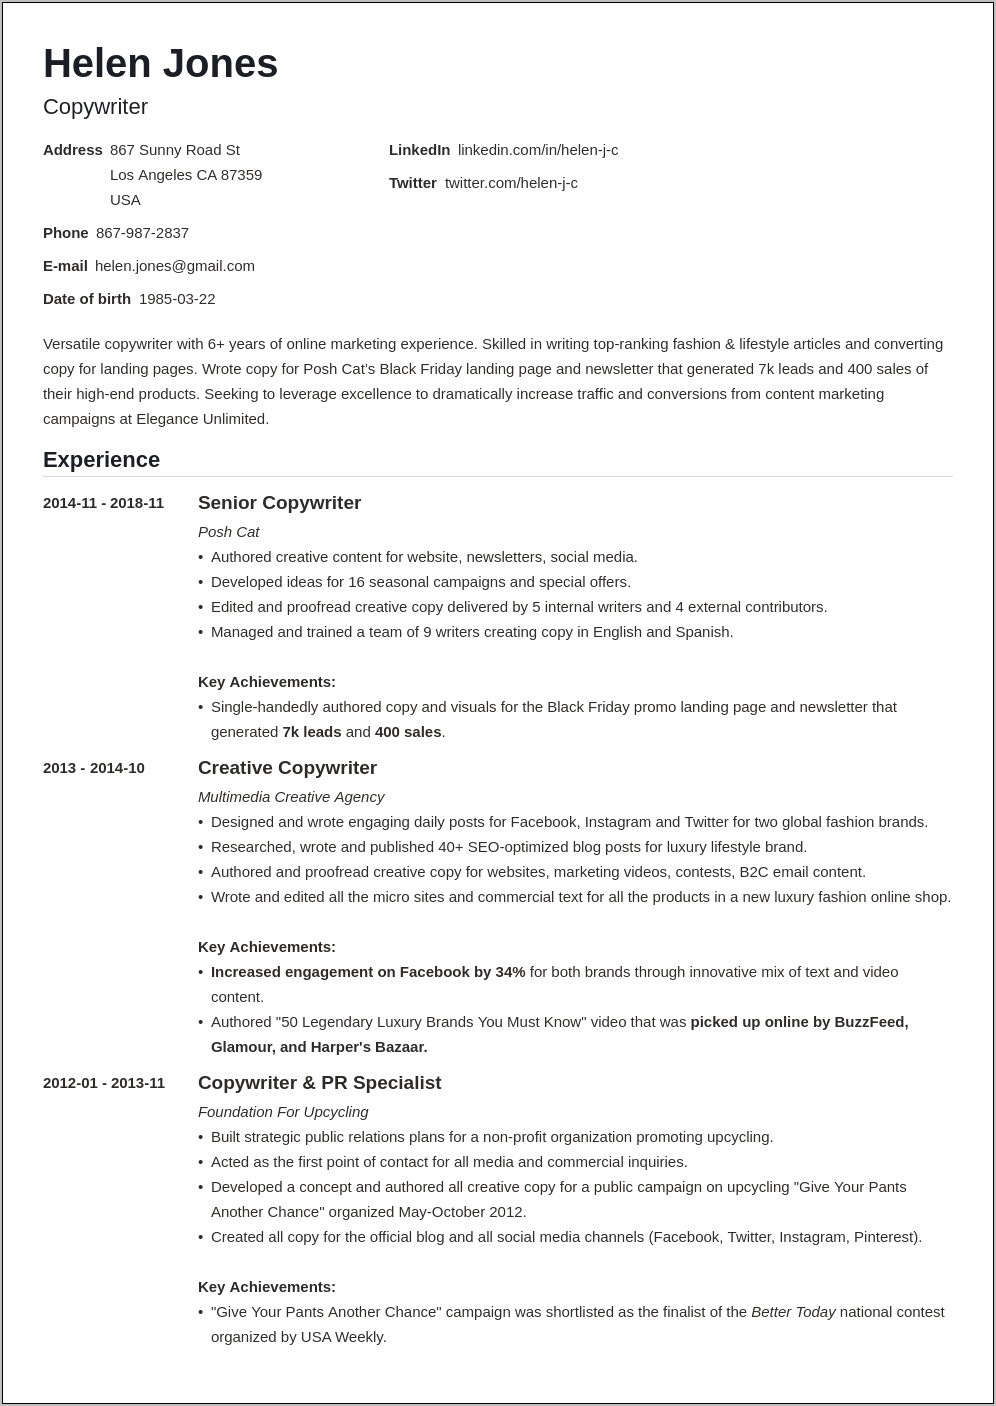 Skills Listed On Resume For Writing Jobs